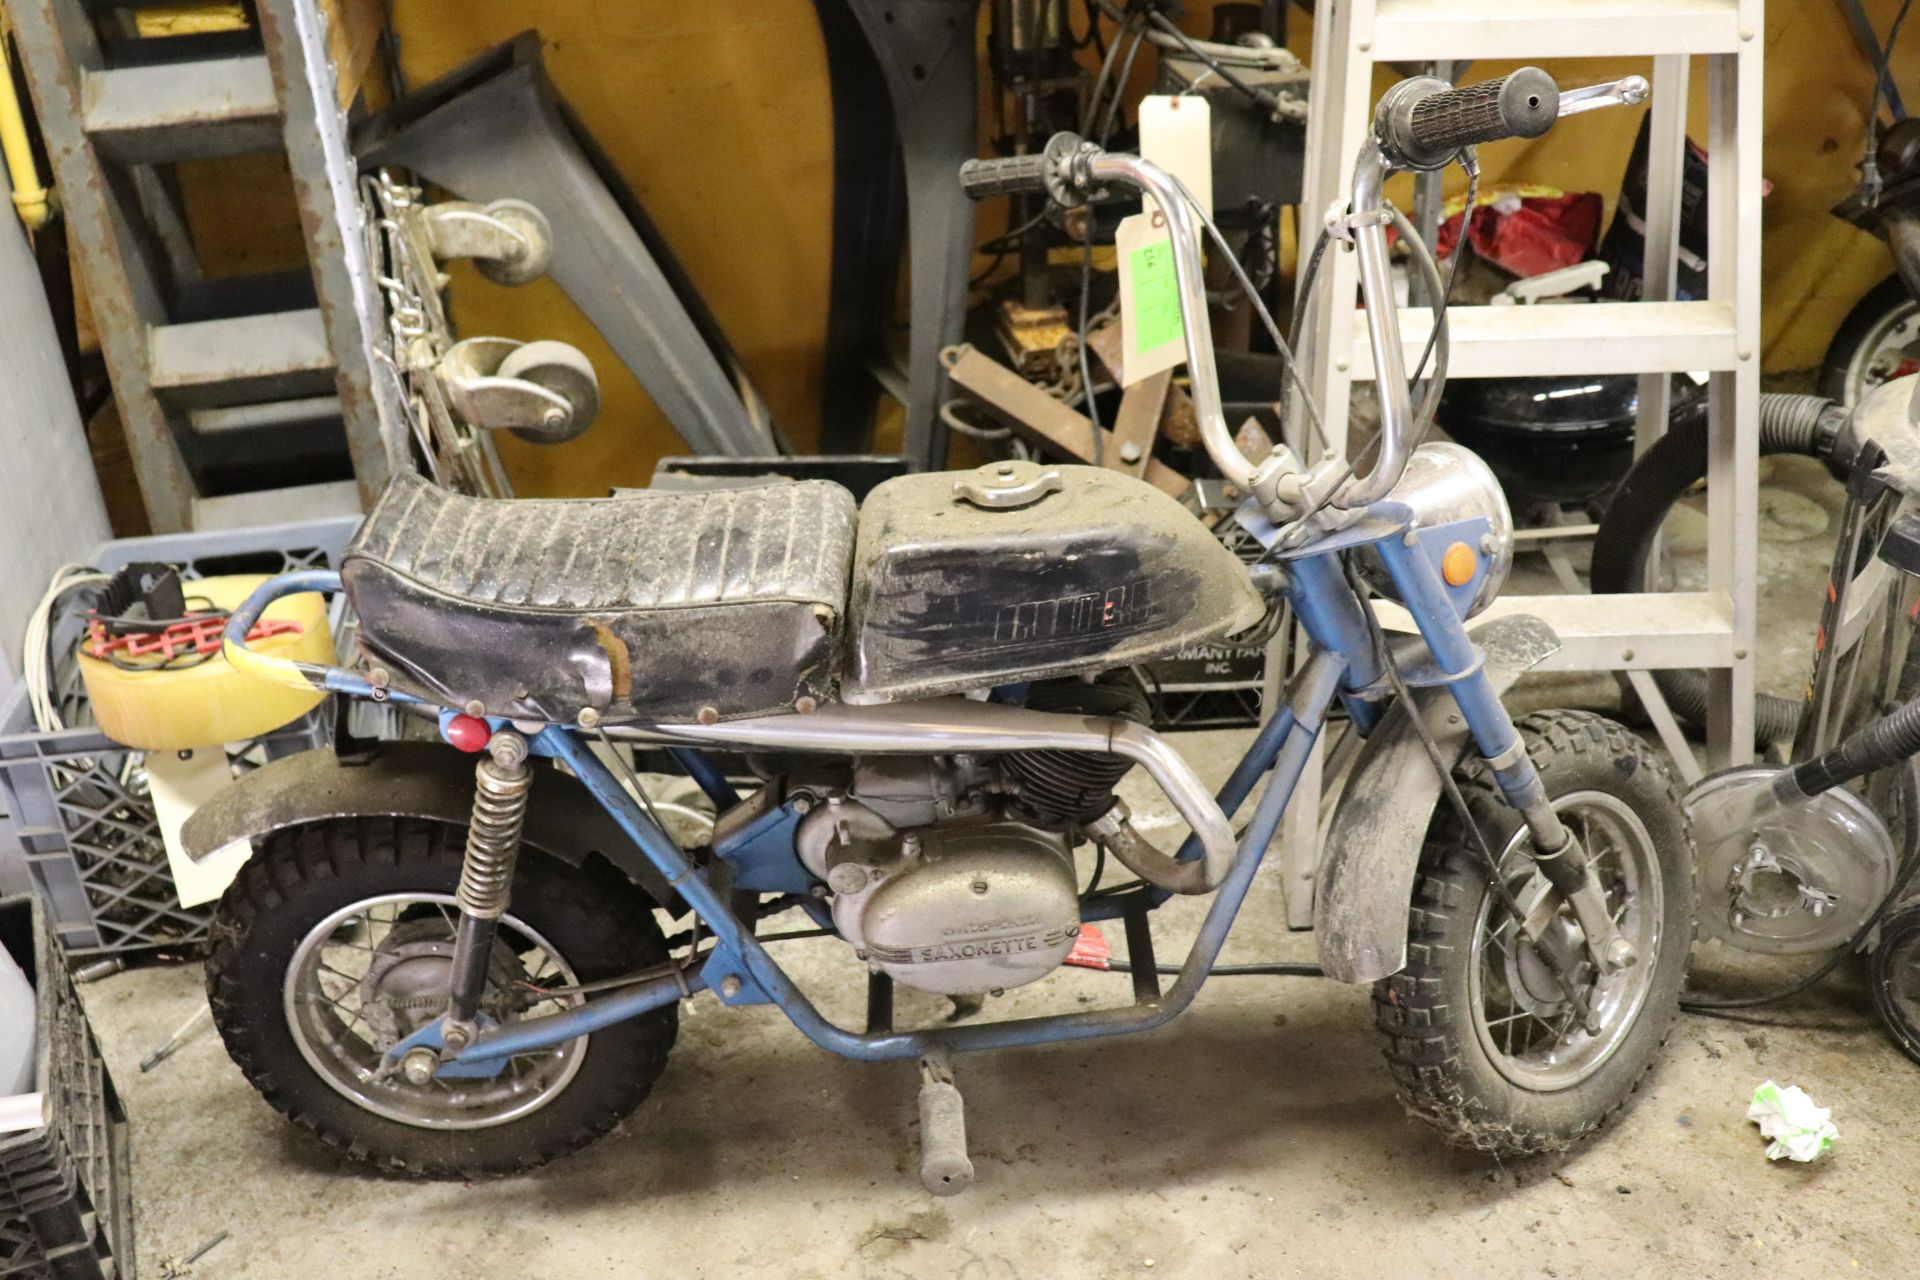 1971 Coleman Sport 240 rolling chassis mini bike MINI BIKES MARKED AS PARTS BIKES, NOT OPERATIONAL,